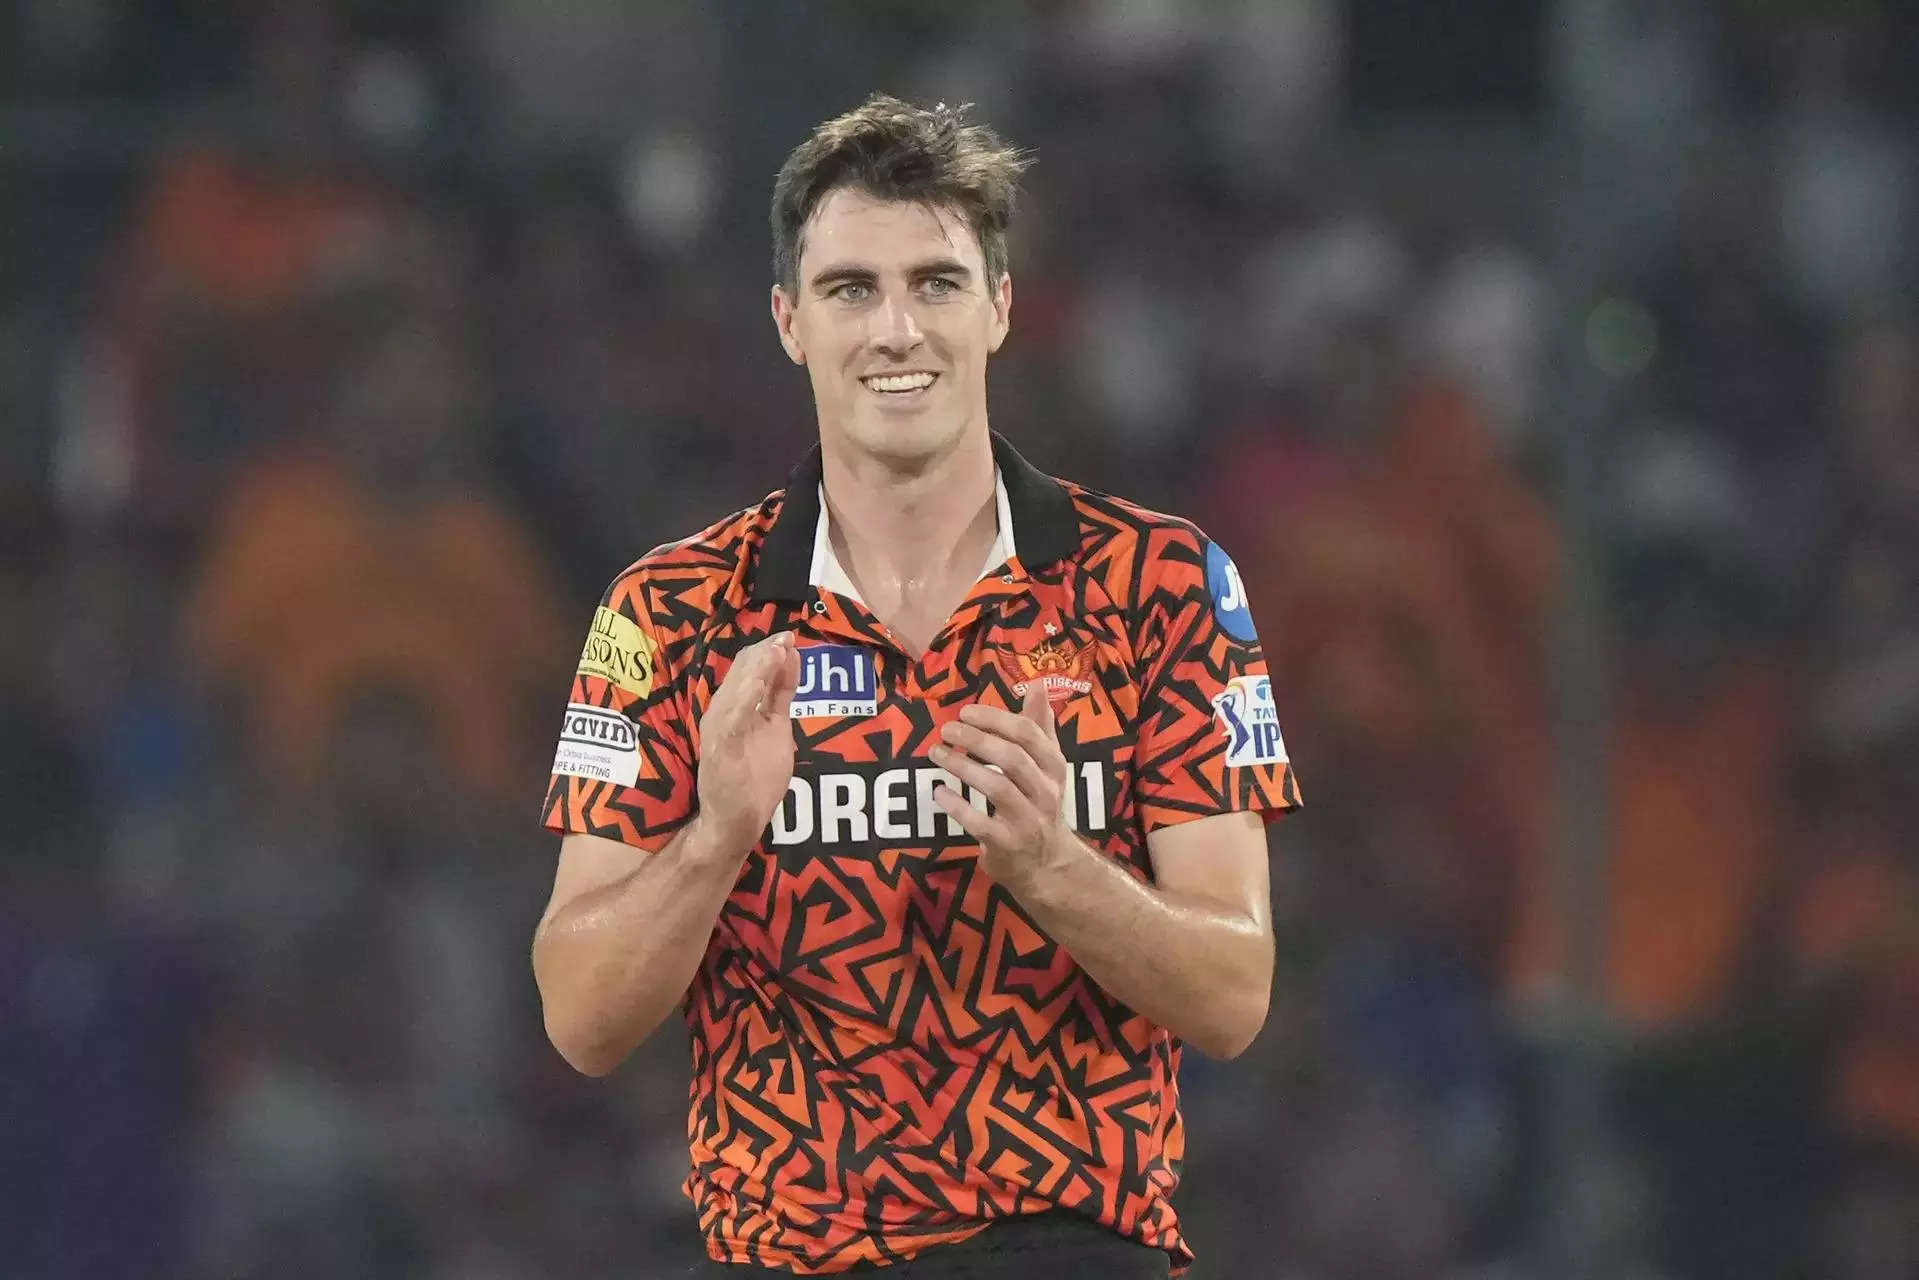 'Would not want to bowl to him': Pat Cummins reveals he is 'scared' of bowling against this player 